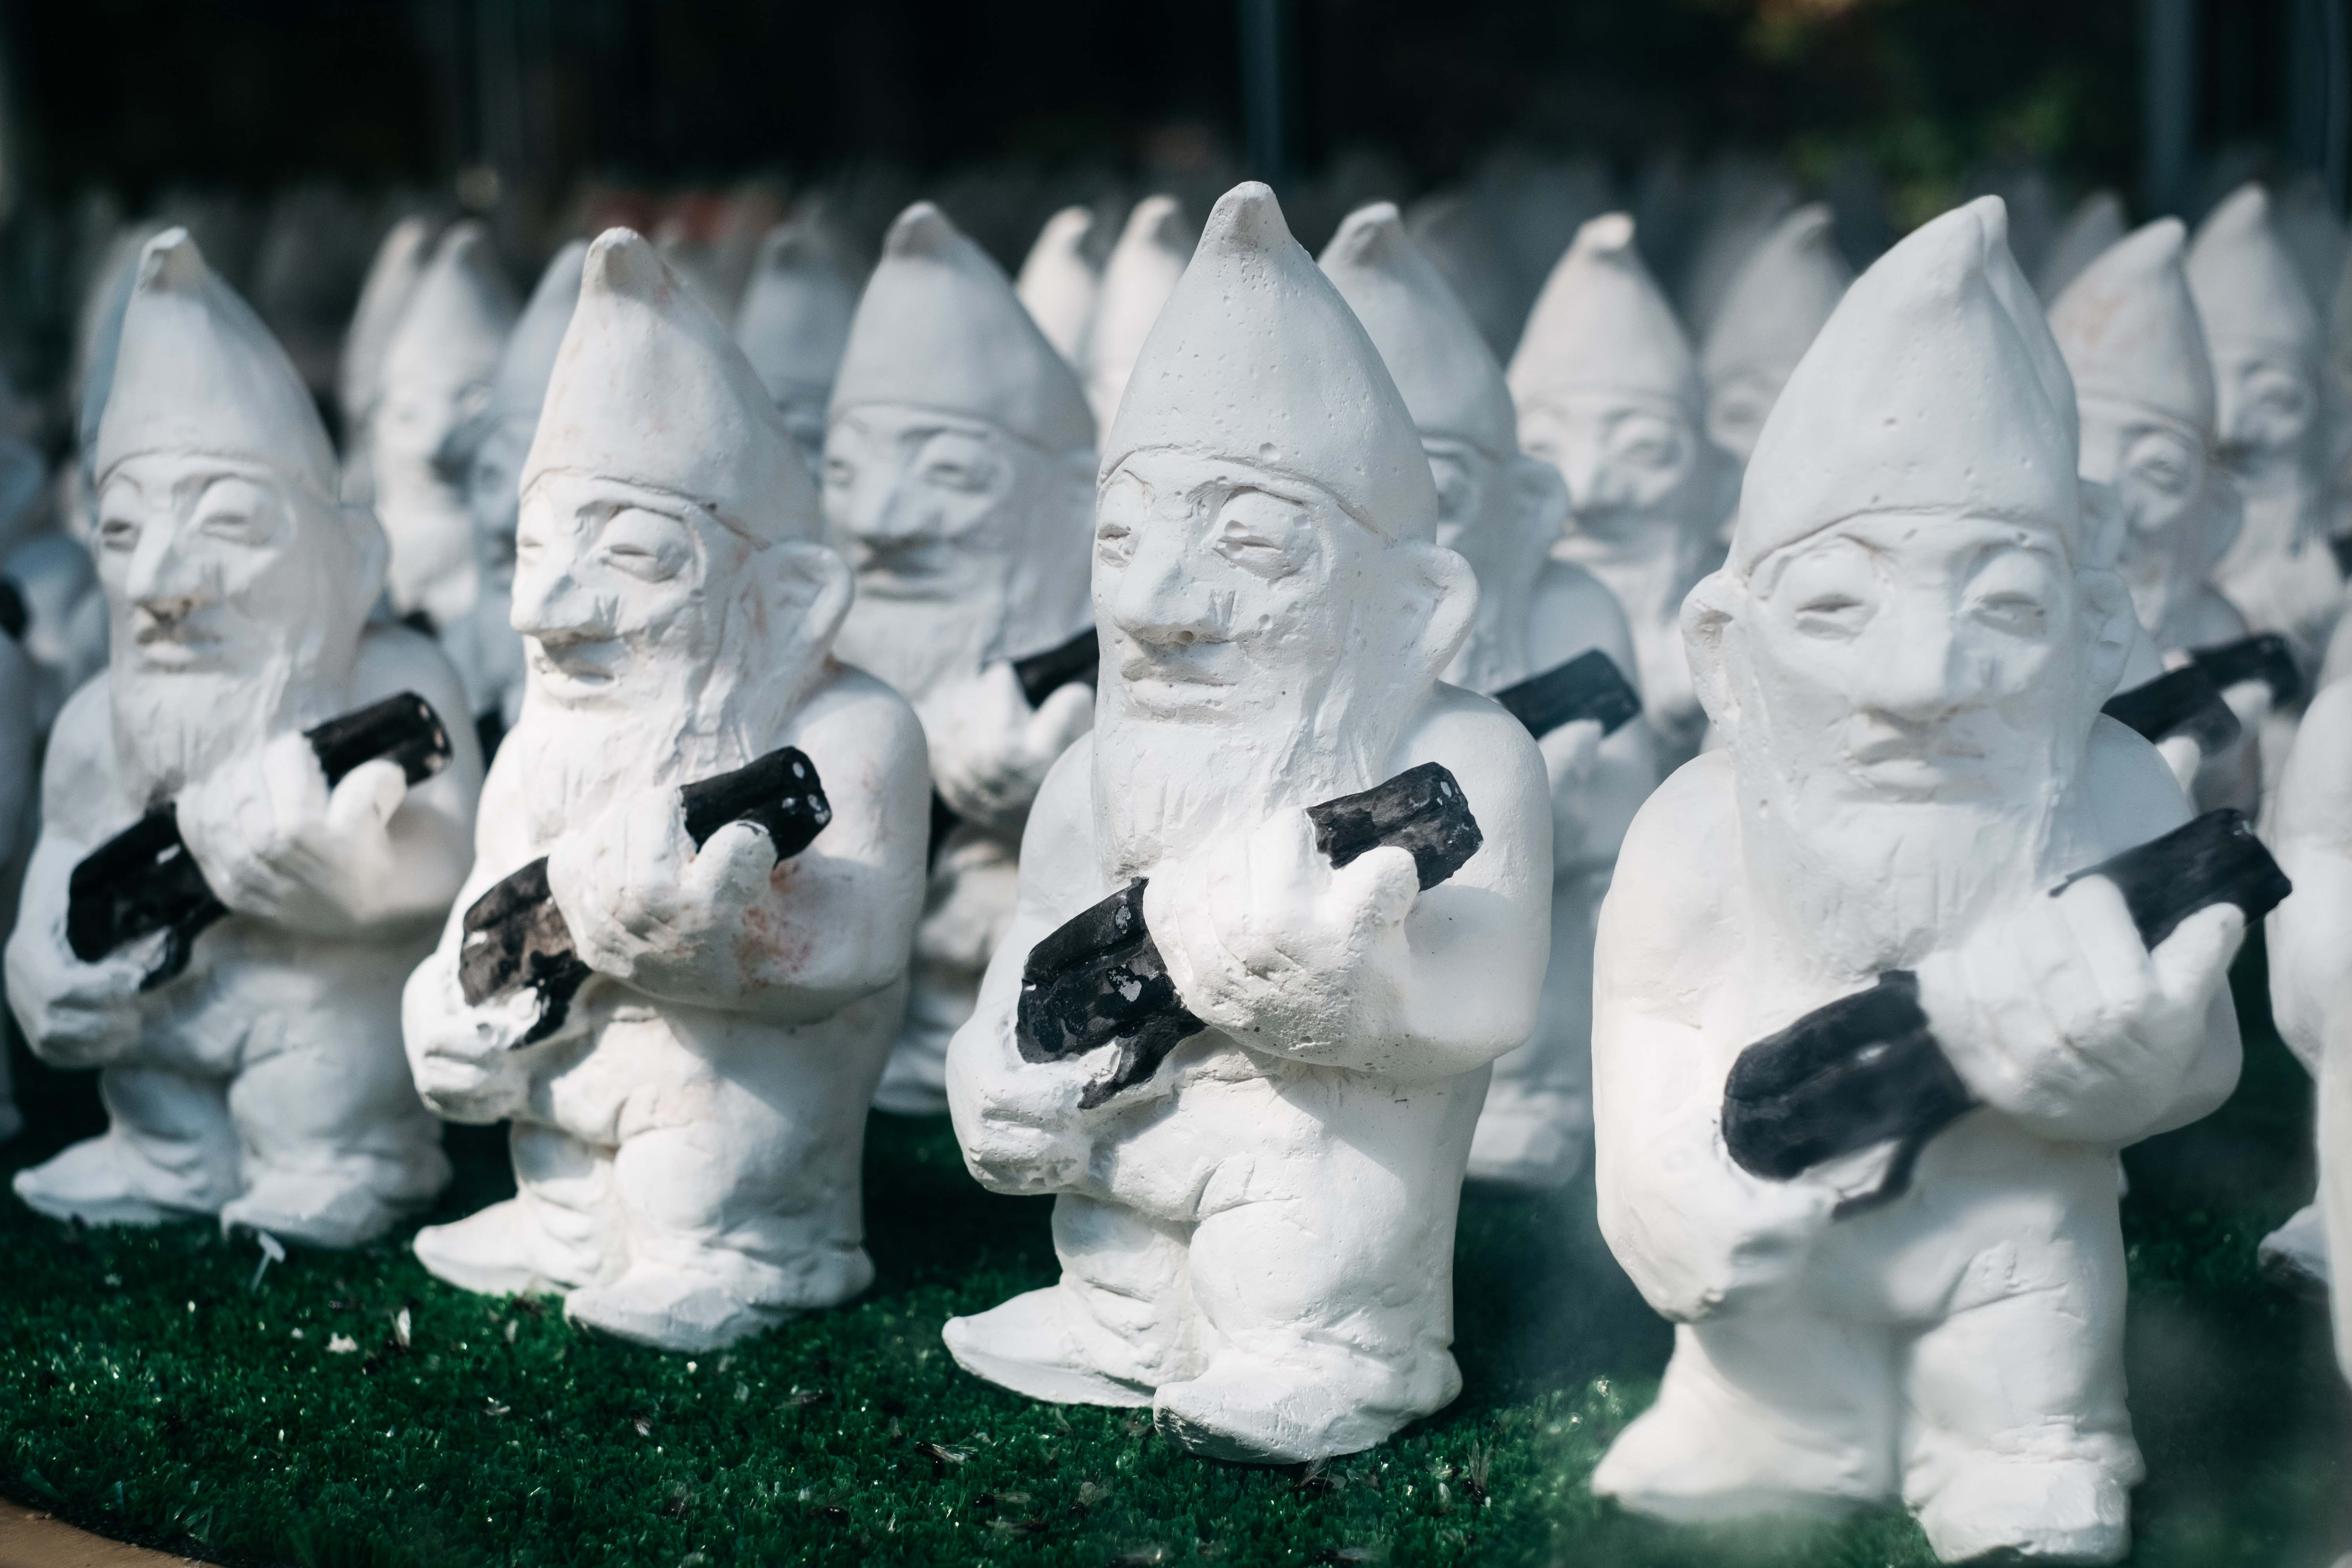 Sculptures of gnomes holding guns